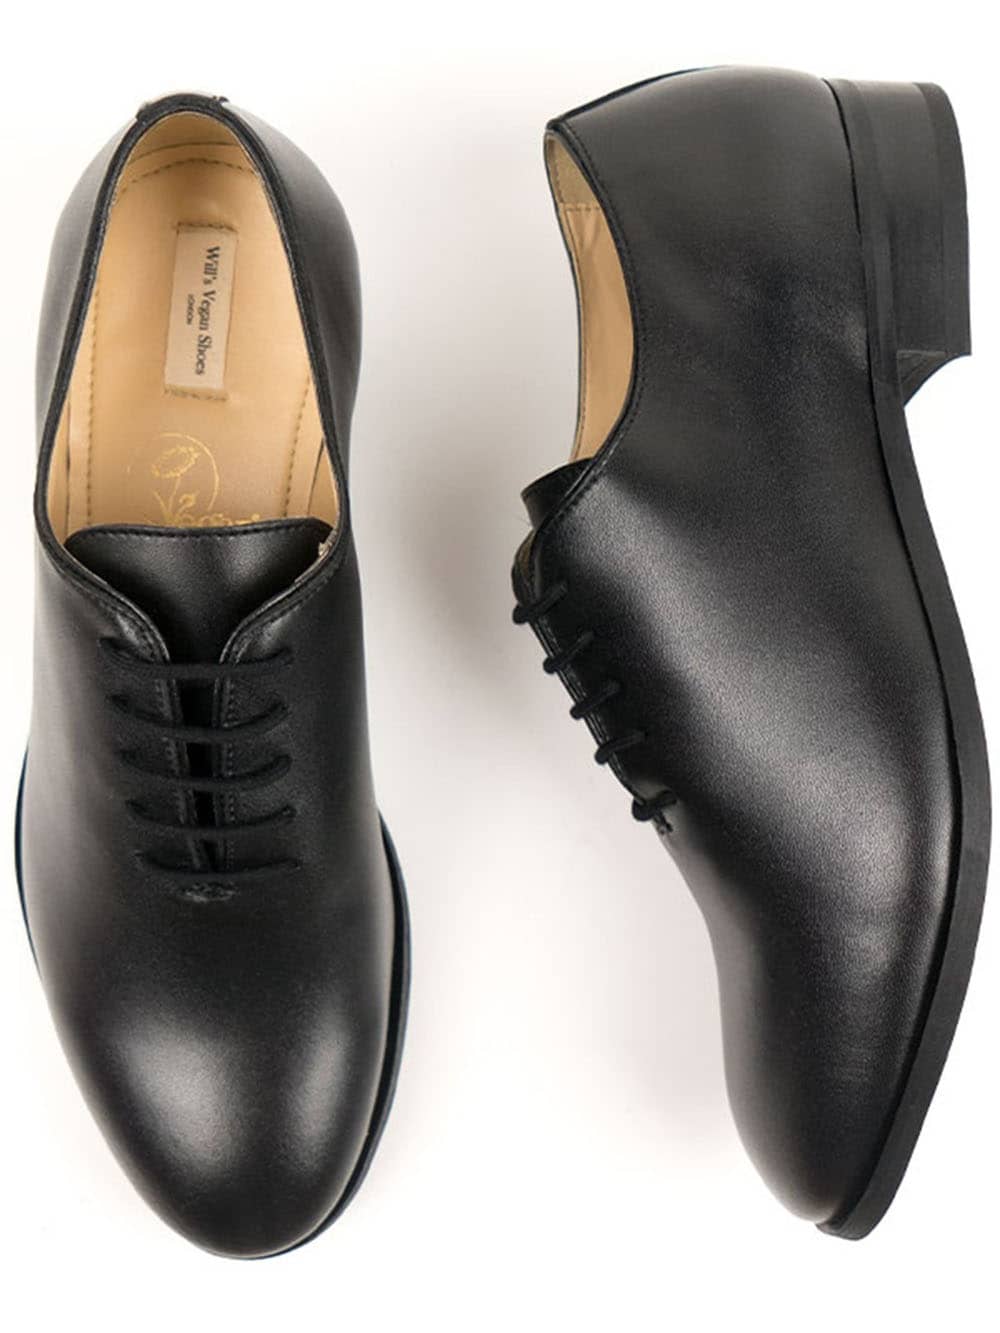 Black laced non leather dress shoes mens from Wills Vegan Store